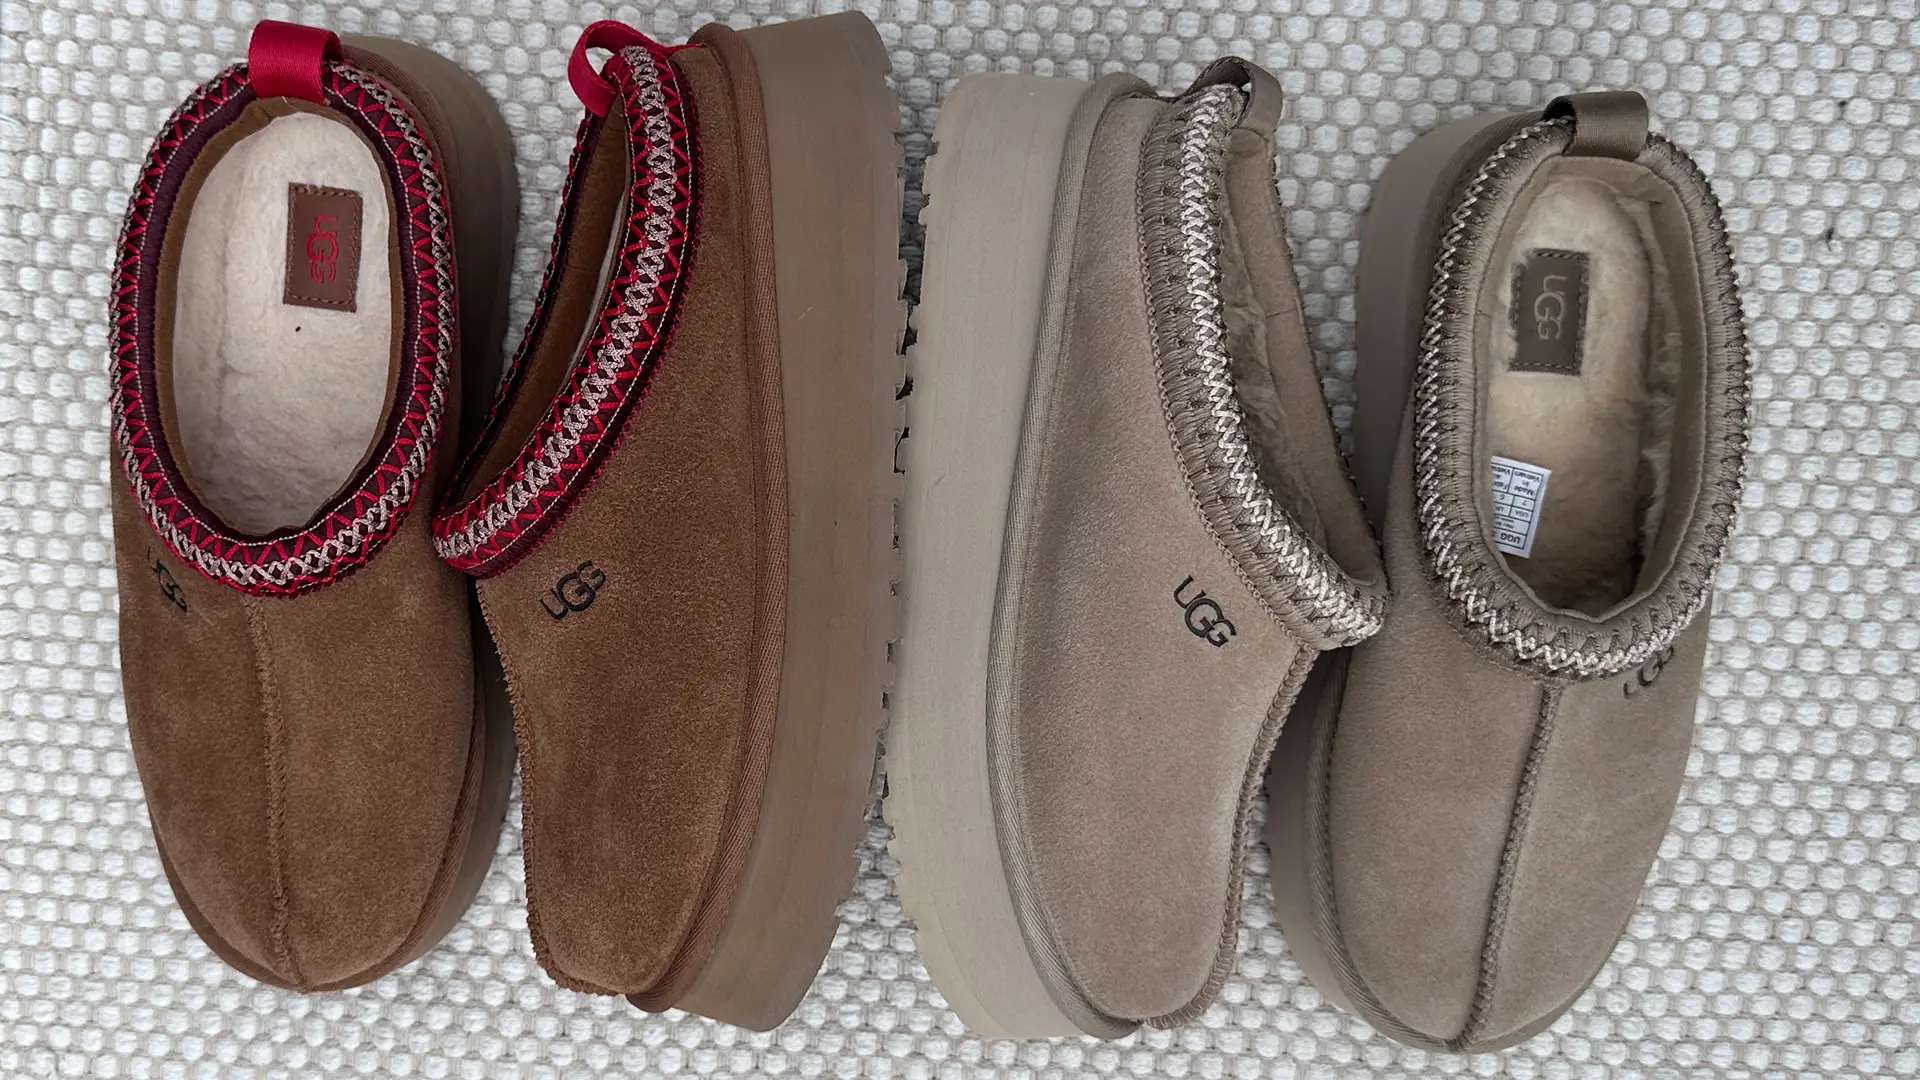 The Ultimate UGG Size Guide: Does UGG Footwear Run True to Size? | The ...